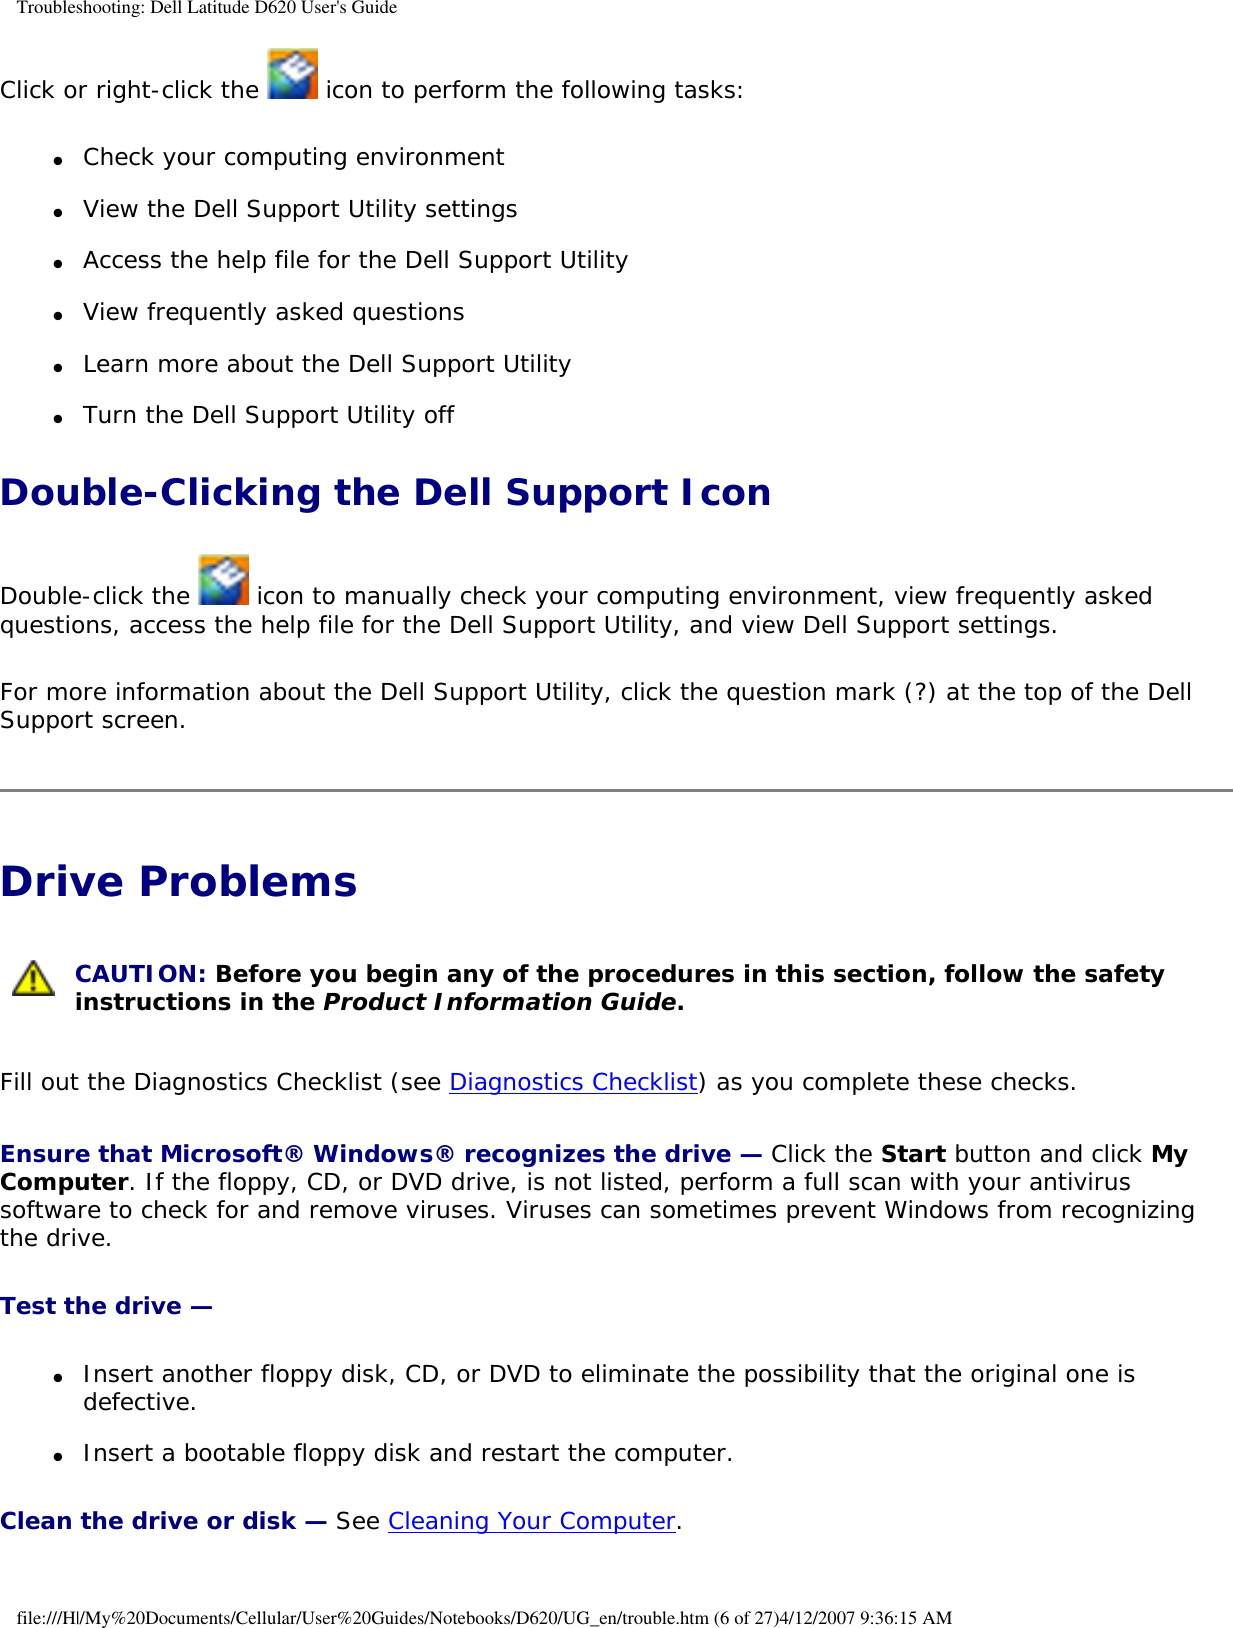 Troubleshooting: Dell Latitude D620 User&apos;s GuideClick or right-click the   icon to perform the following tasks:●     Check your computing environment   ●     View the Dell Support Utility settings  ●     Access the help file for the Dell Support Utility  ●     View frequently asked questions  ●     Learn more about the Dell Support Utility  ●     Turn the Dell Support Utility off  Double-Clicking the Dell Support IconDouble-click the   icon to manually check your computing environment, view frequently asked questions, access the help file for the Dell Support Utility, and view Dell Support settings.For more information about the Dell Support Utility, click the question mark (?) at the top of the Dell Support screen.Drive Problems  CAUTION: Before you begin any of the procedures in this section, follow the safety instructions in the Product Information Guide.Fill out the Diagnostics Checklist (see Diagnostics Checklist) as you complete these checks.Ensure that Microsoft® Windows® recognizes the drive — Click the Start button and click My Computer. If the floppy, CD, or DVD drive, is not listed, perform a full scan with your antivirus software to check for and remove viruses. Viruses can sometimes prevent Windows from recognizing the drive.Test the drive — ●     Insert another floppy disk, CD, or DVD to eliminate the possibility that the original one is defective.  ●     Insert a bootable floppy disk and restart the computer.  Clean the drive or disk — See Cleaning Your Computer.file:///H|/My%20Documents/Cellular/User%20Guides/Notebooks/D620/UG_en/trouble.htm (6 of 27)4/12/2007 9:36:15 AM